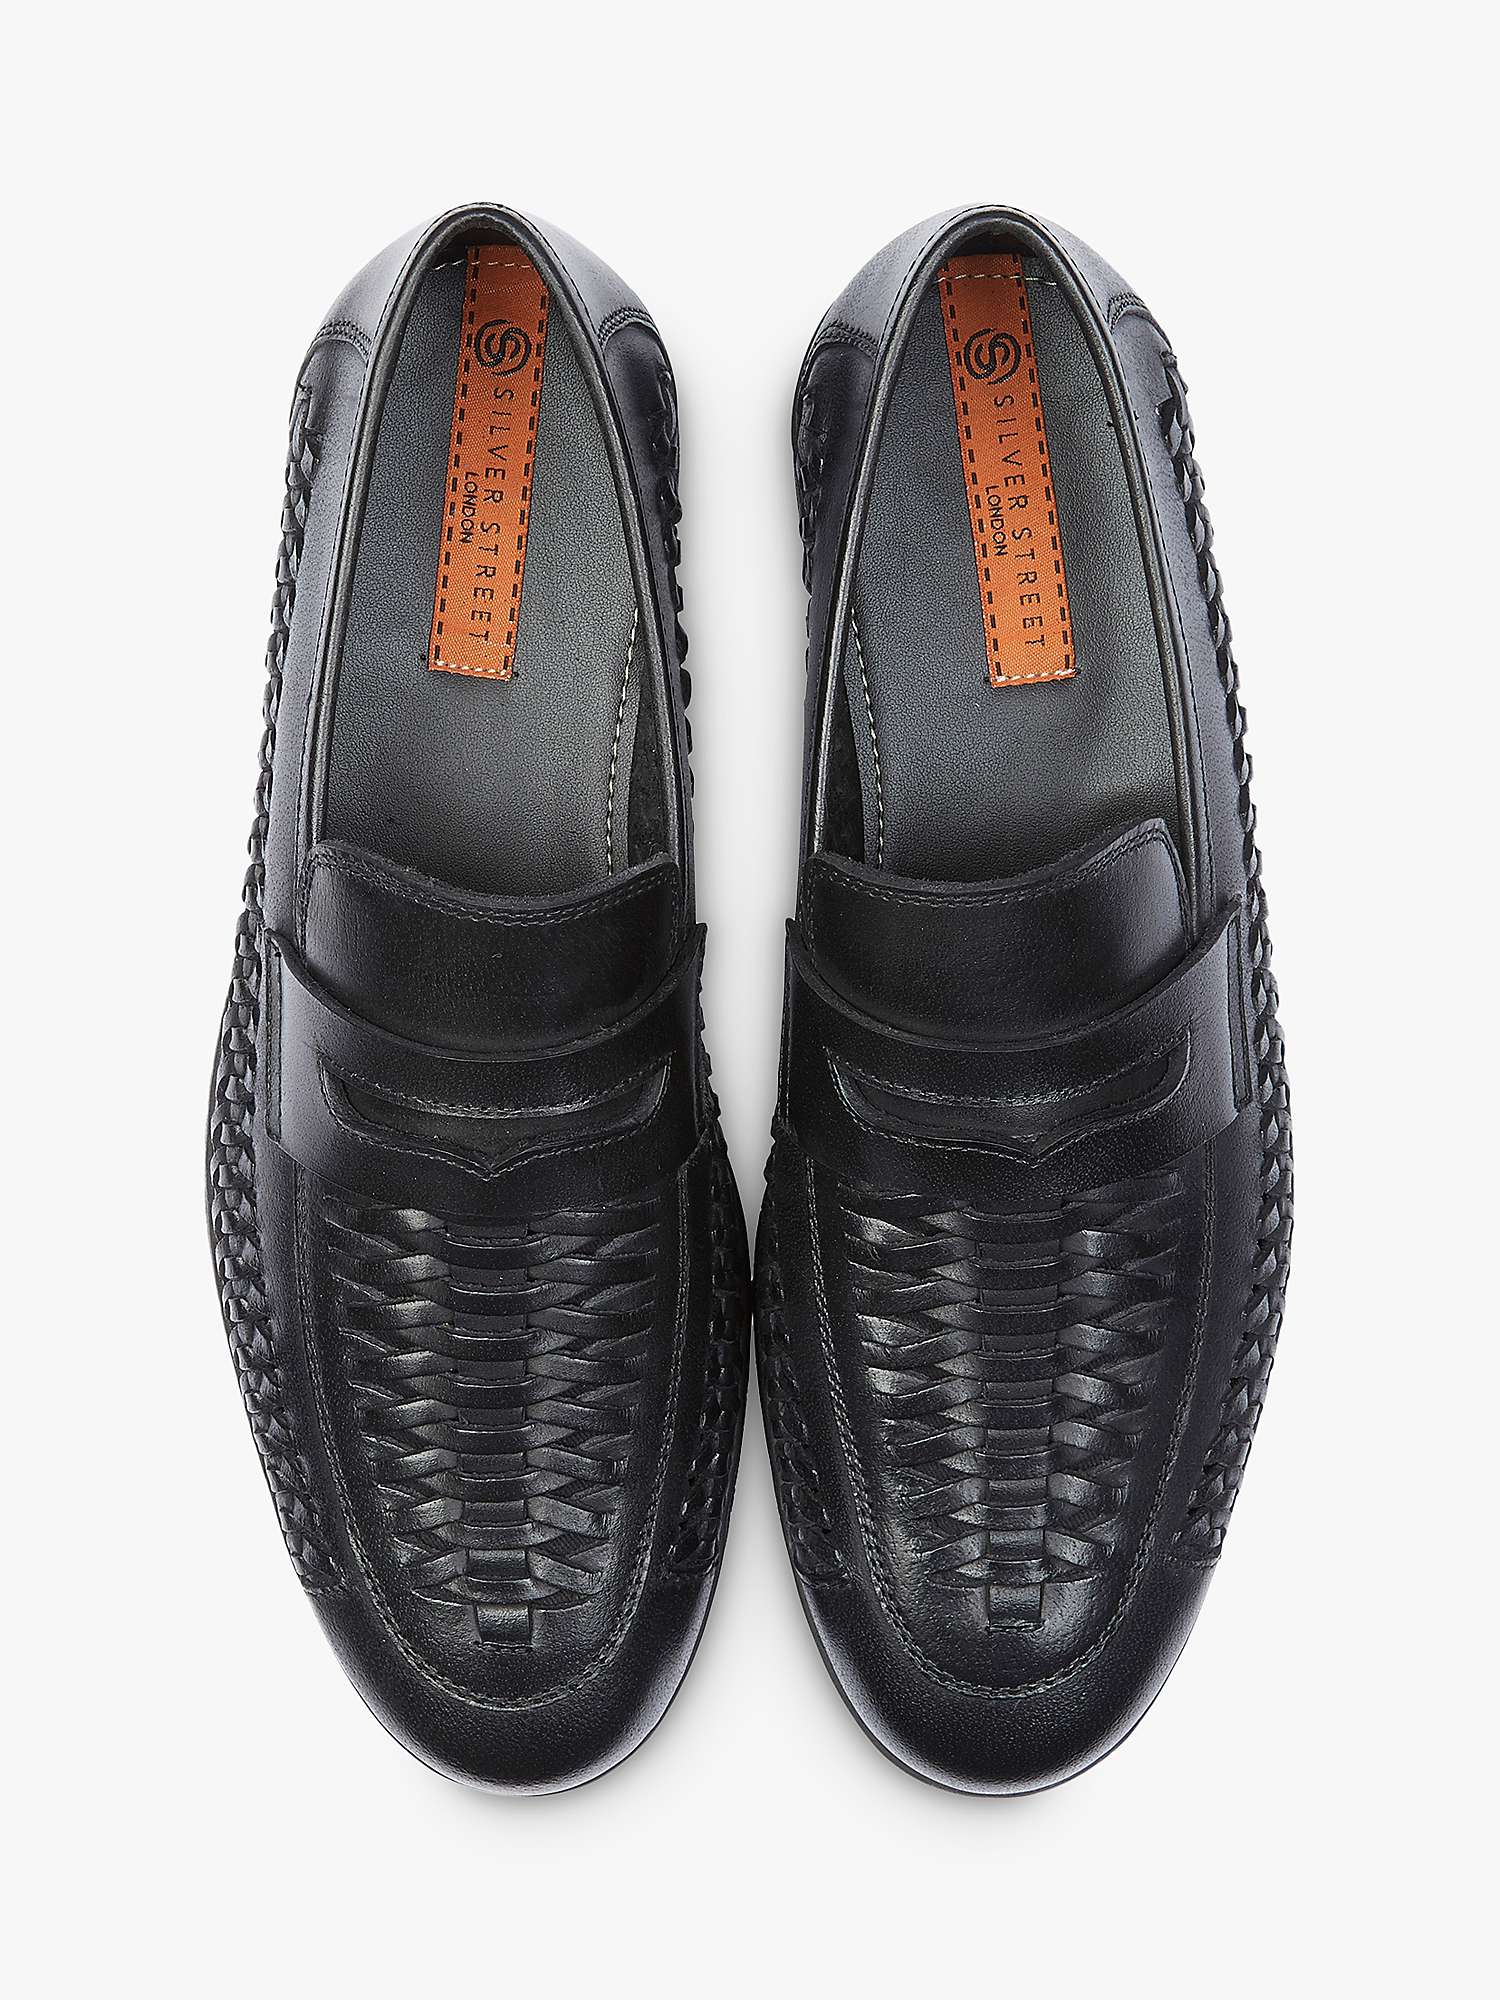 Buy Silver Street London Perth Leather Loafers Online at johnlewis.com